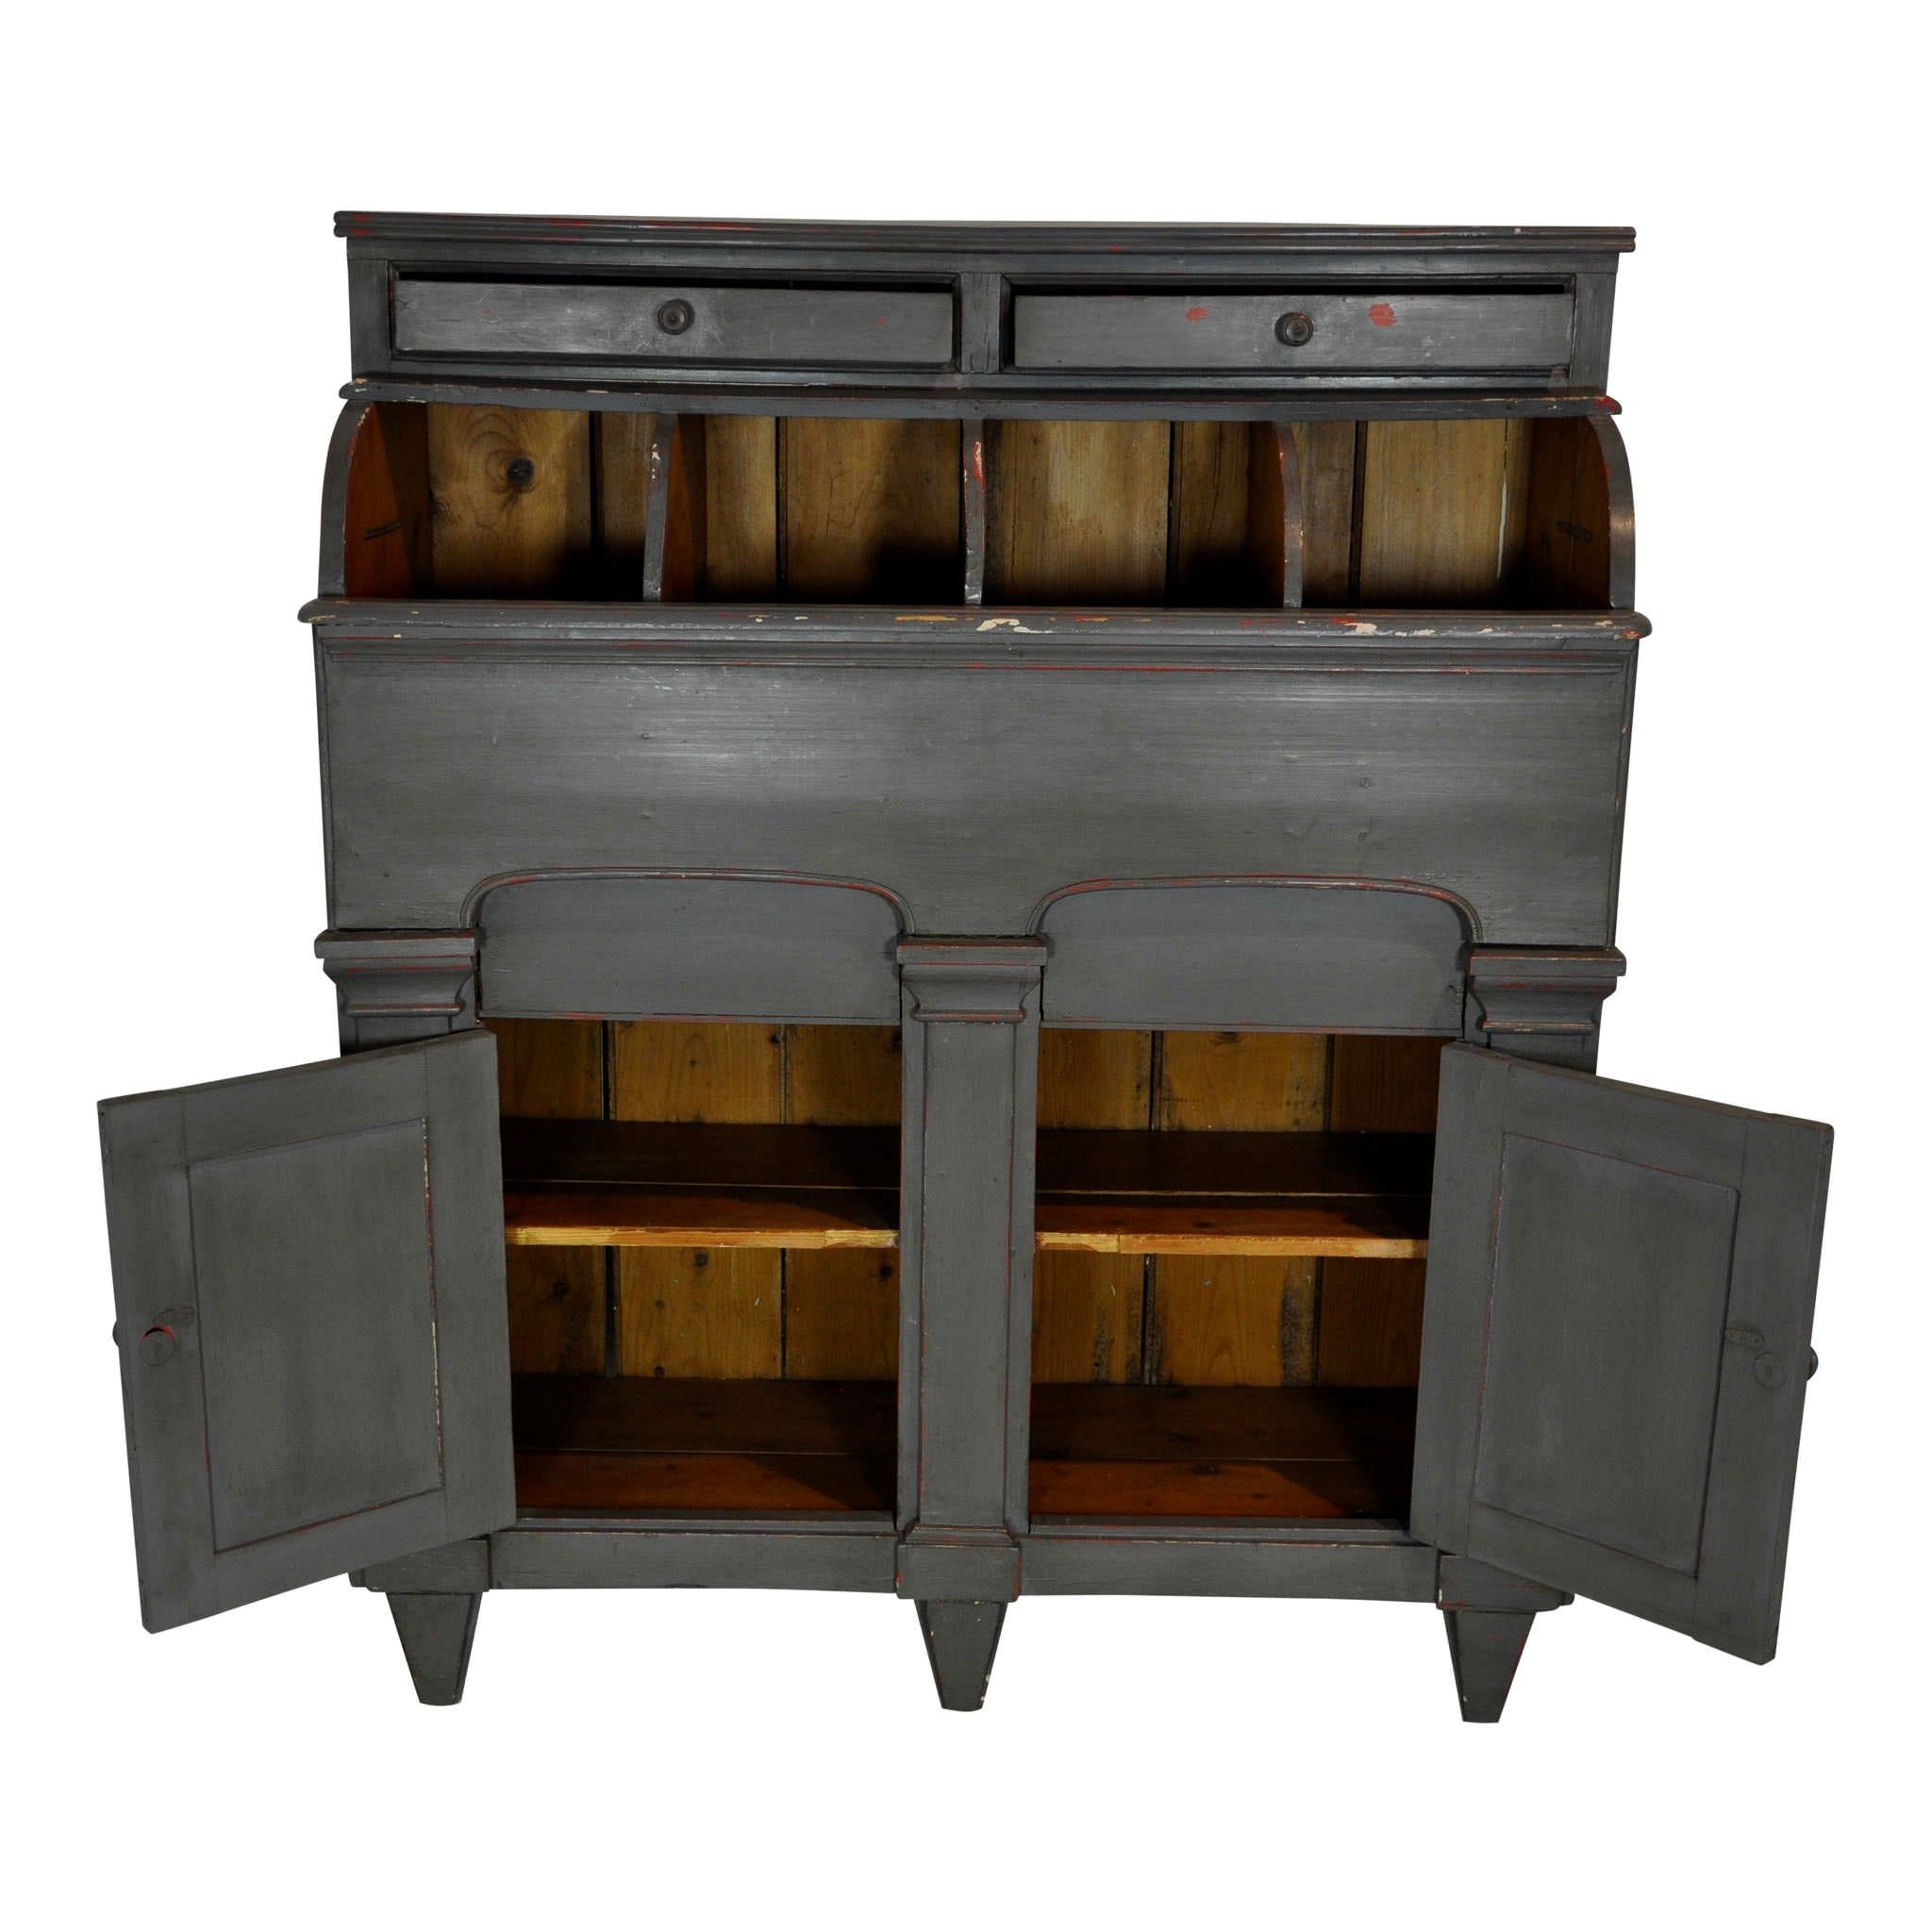 Can't you picture this cabinet with storage bins in a small general store? There are four deep bins, which are covered by an arched lid that lifts off. A single shelf inside the double doors and two small drawers above the bins provide additional